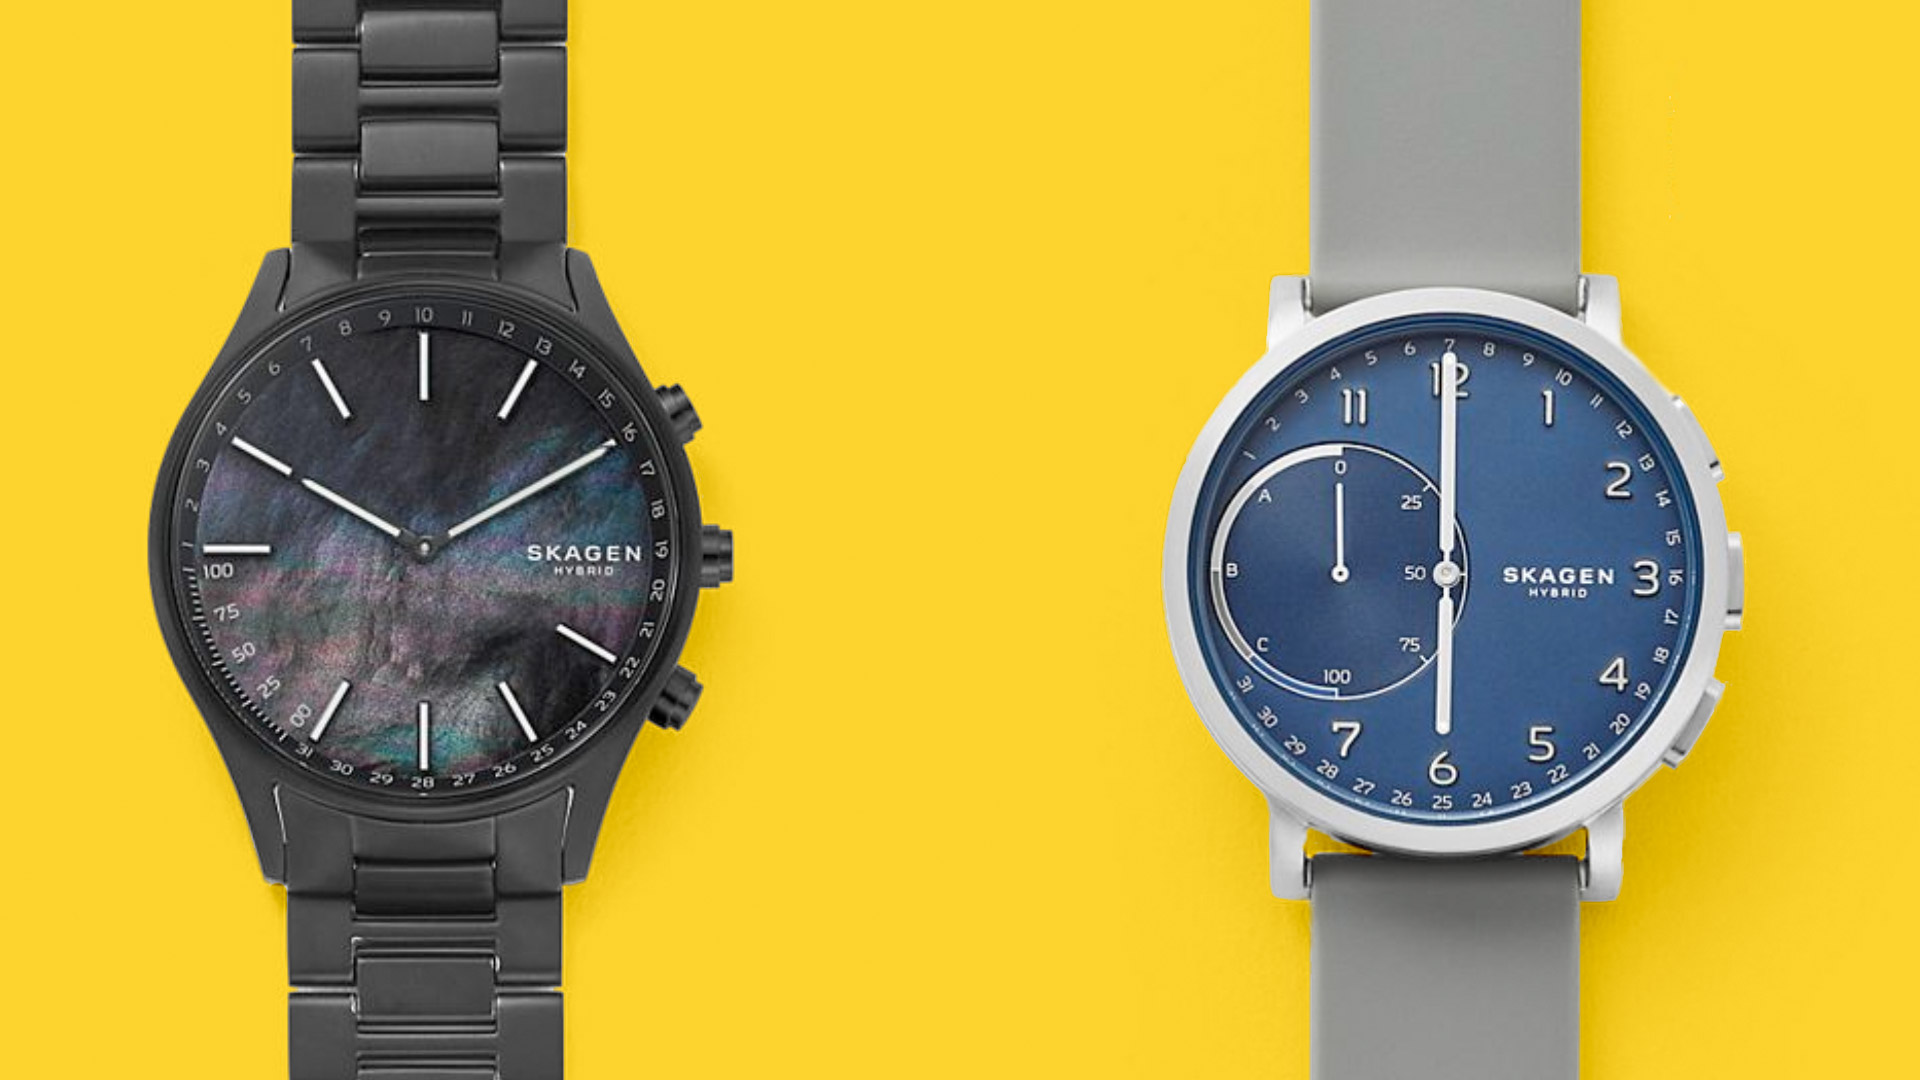 Massive Black discount! Skagen hybrid watches to 75% off right now